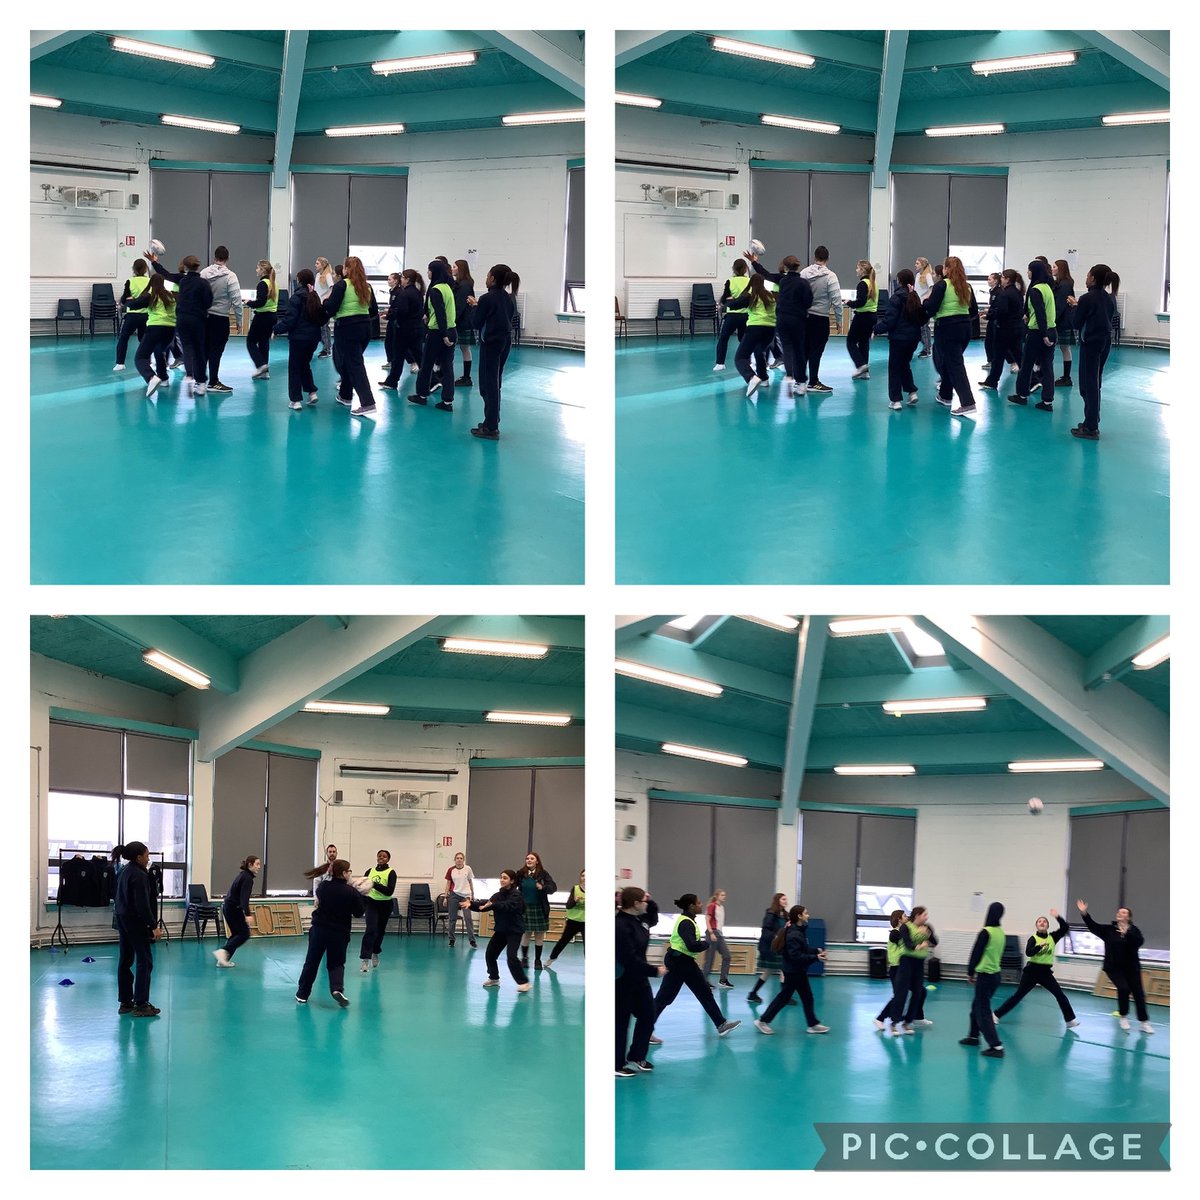 TY students began a 4-week Tag Rugby programme with Leinster Rugby yesterday 🏉🏉 #GirlsinSport @stpaulsg @leinsterrugby